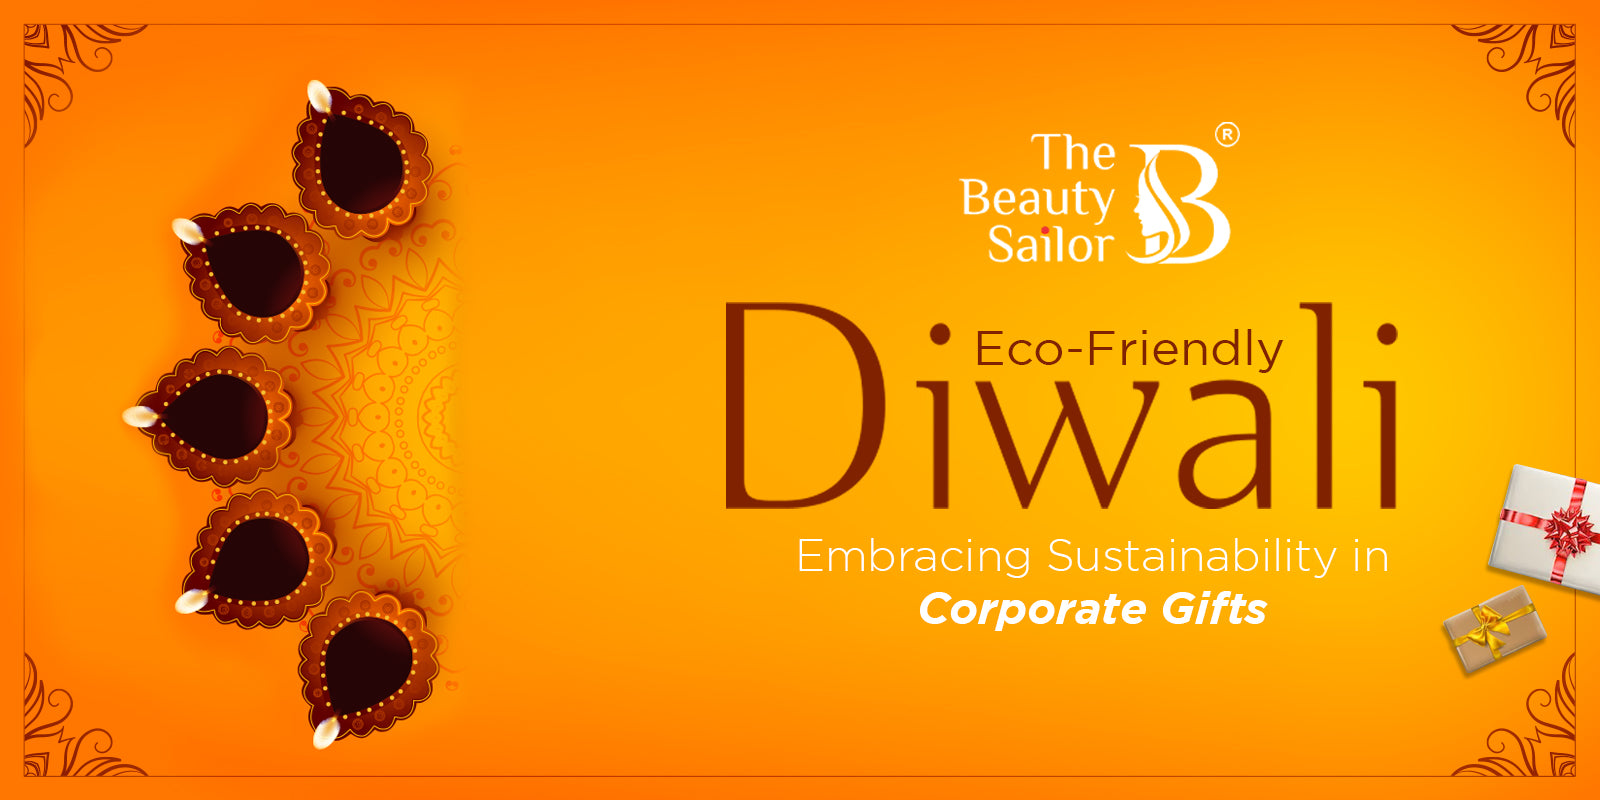 Eco-Friendly Diwali: Embracing Sustainability in Corporate Gifts